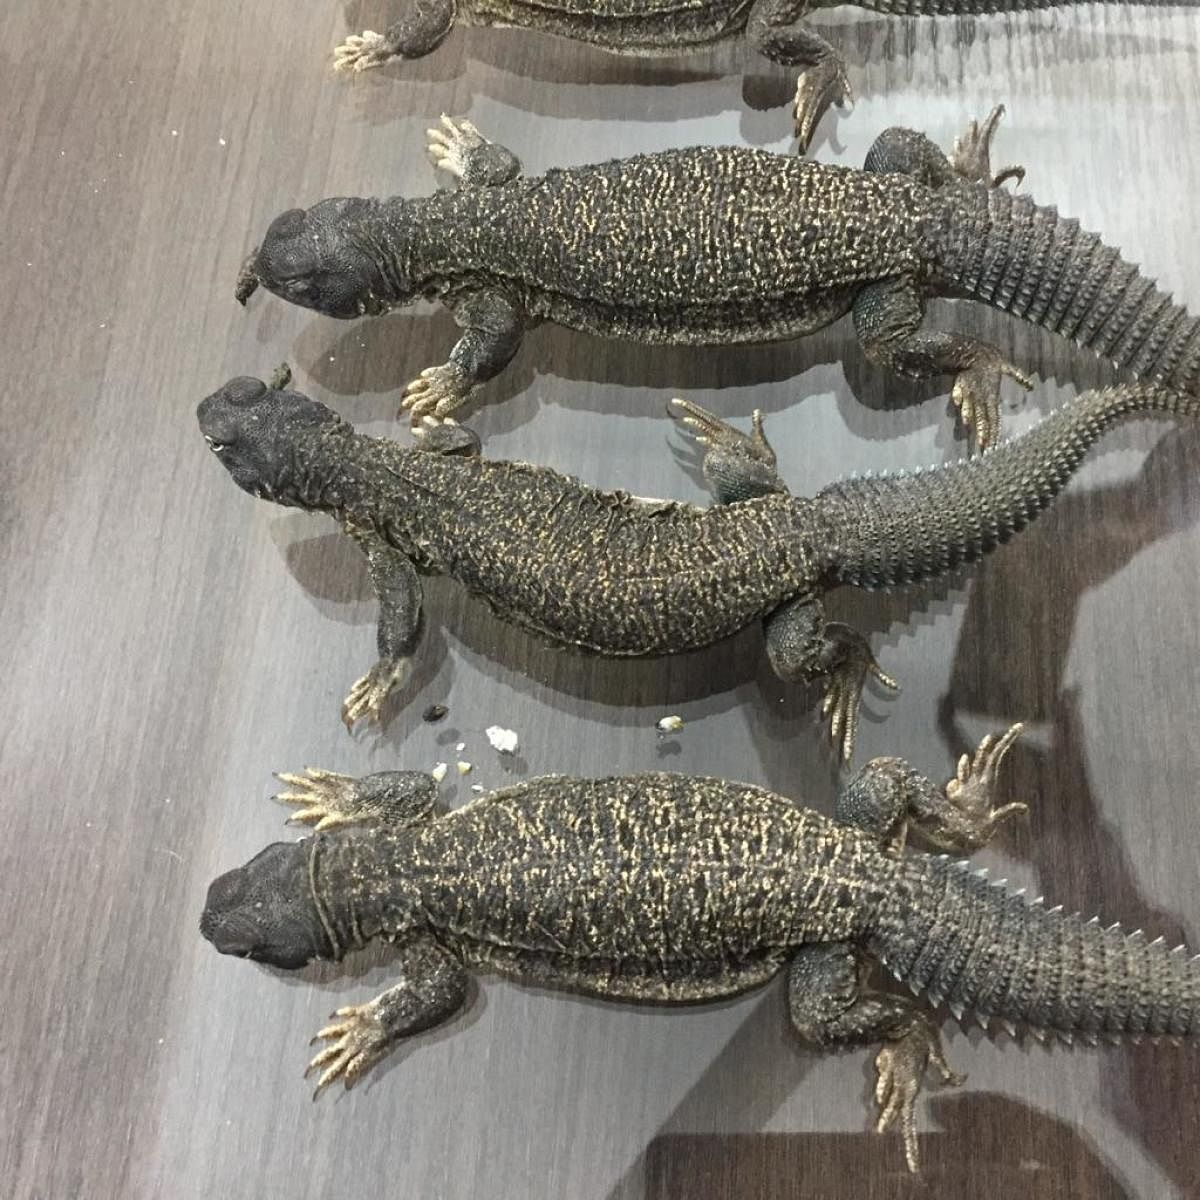 The spiny-tailed lizards endemic to the deserts of Rajasthan seized in Bengaluru. Police believe the animals were to be killed to make aphrodisiacs. PIC COURTESY: POLICE